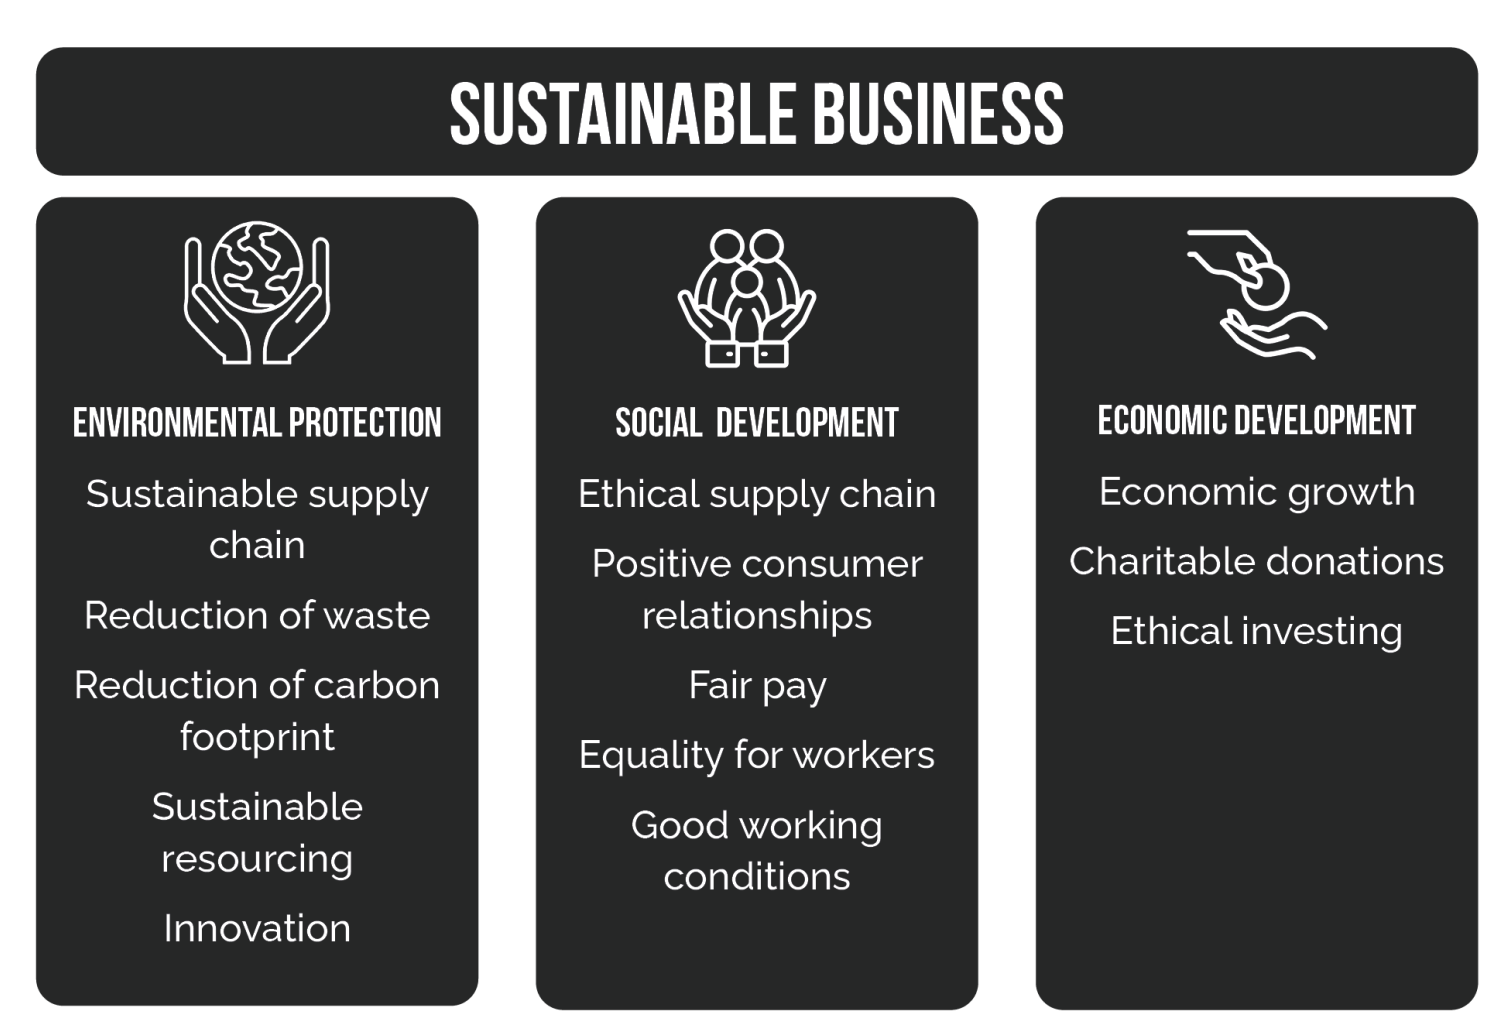 Three pillars of sustainable business: Environment, social and economic.